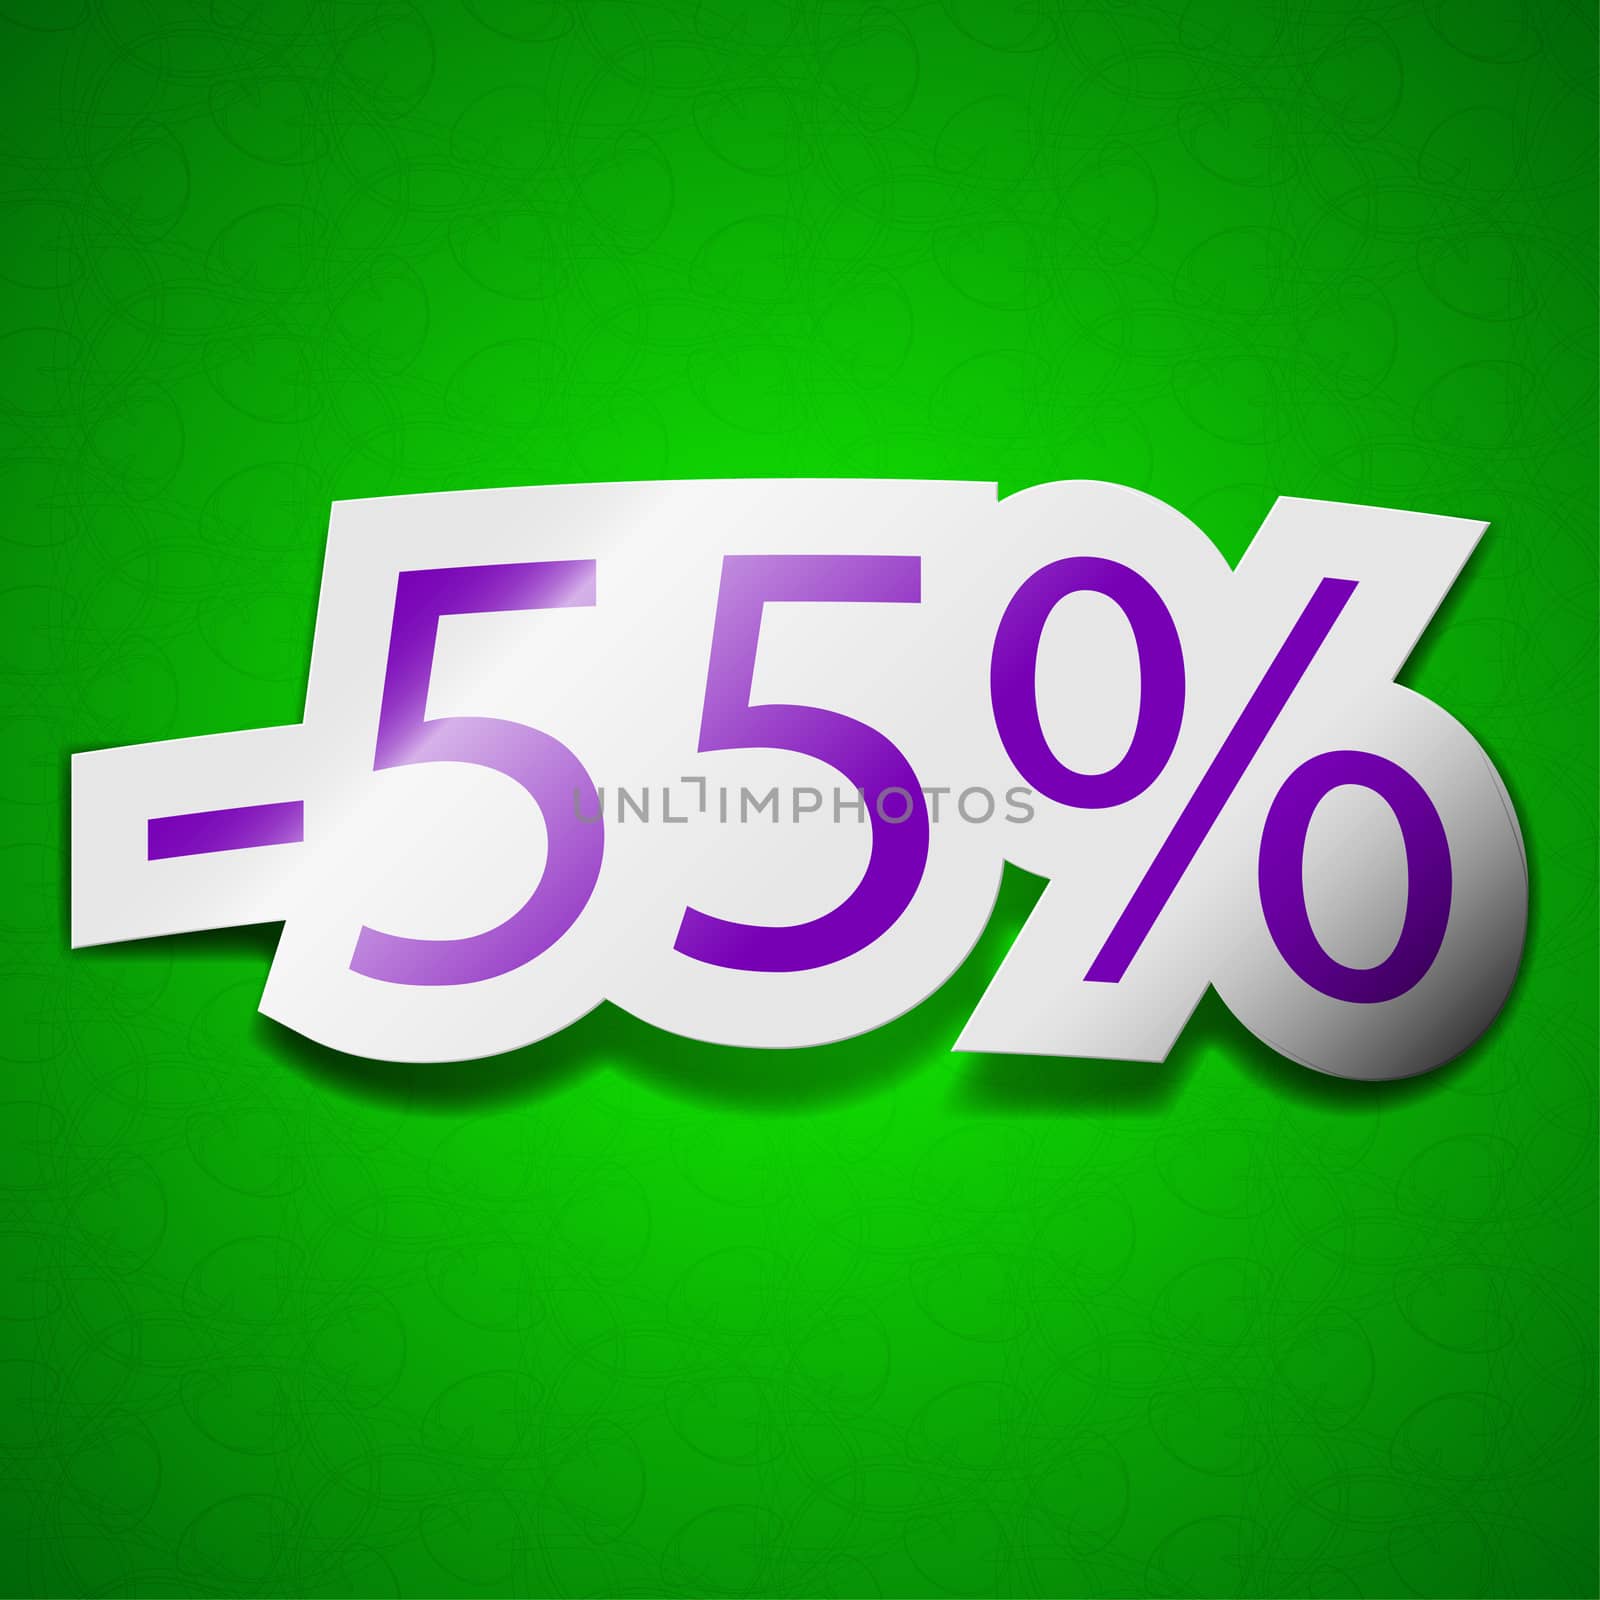 55 percent discount icon sign. Symbol chic colored sticky label on green background.  illustration